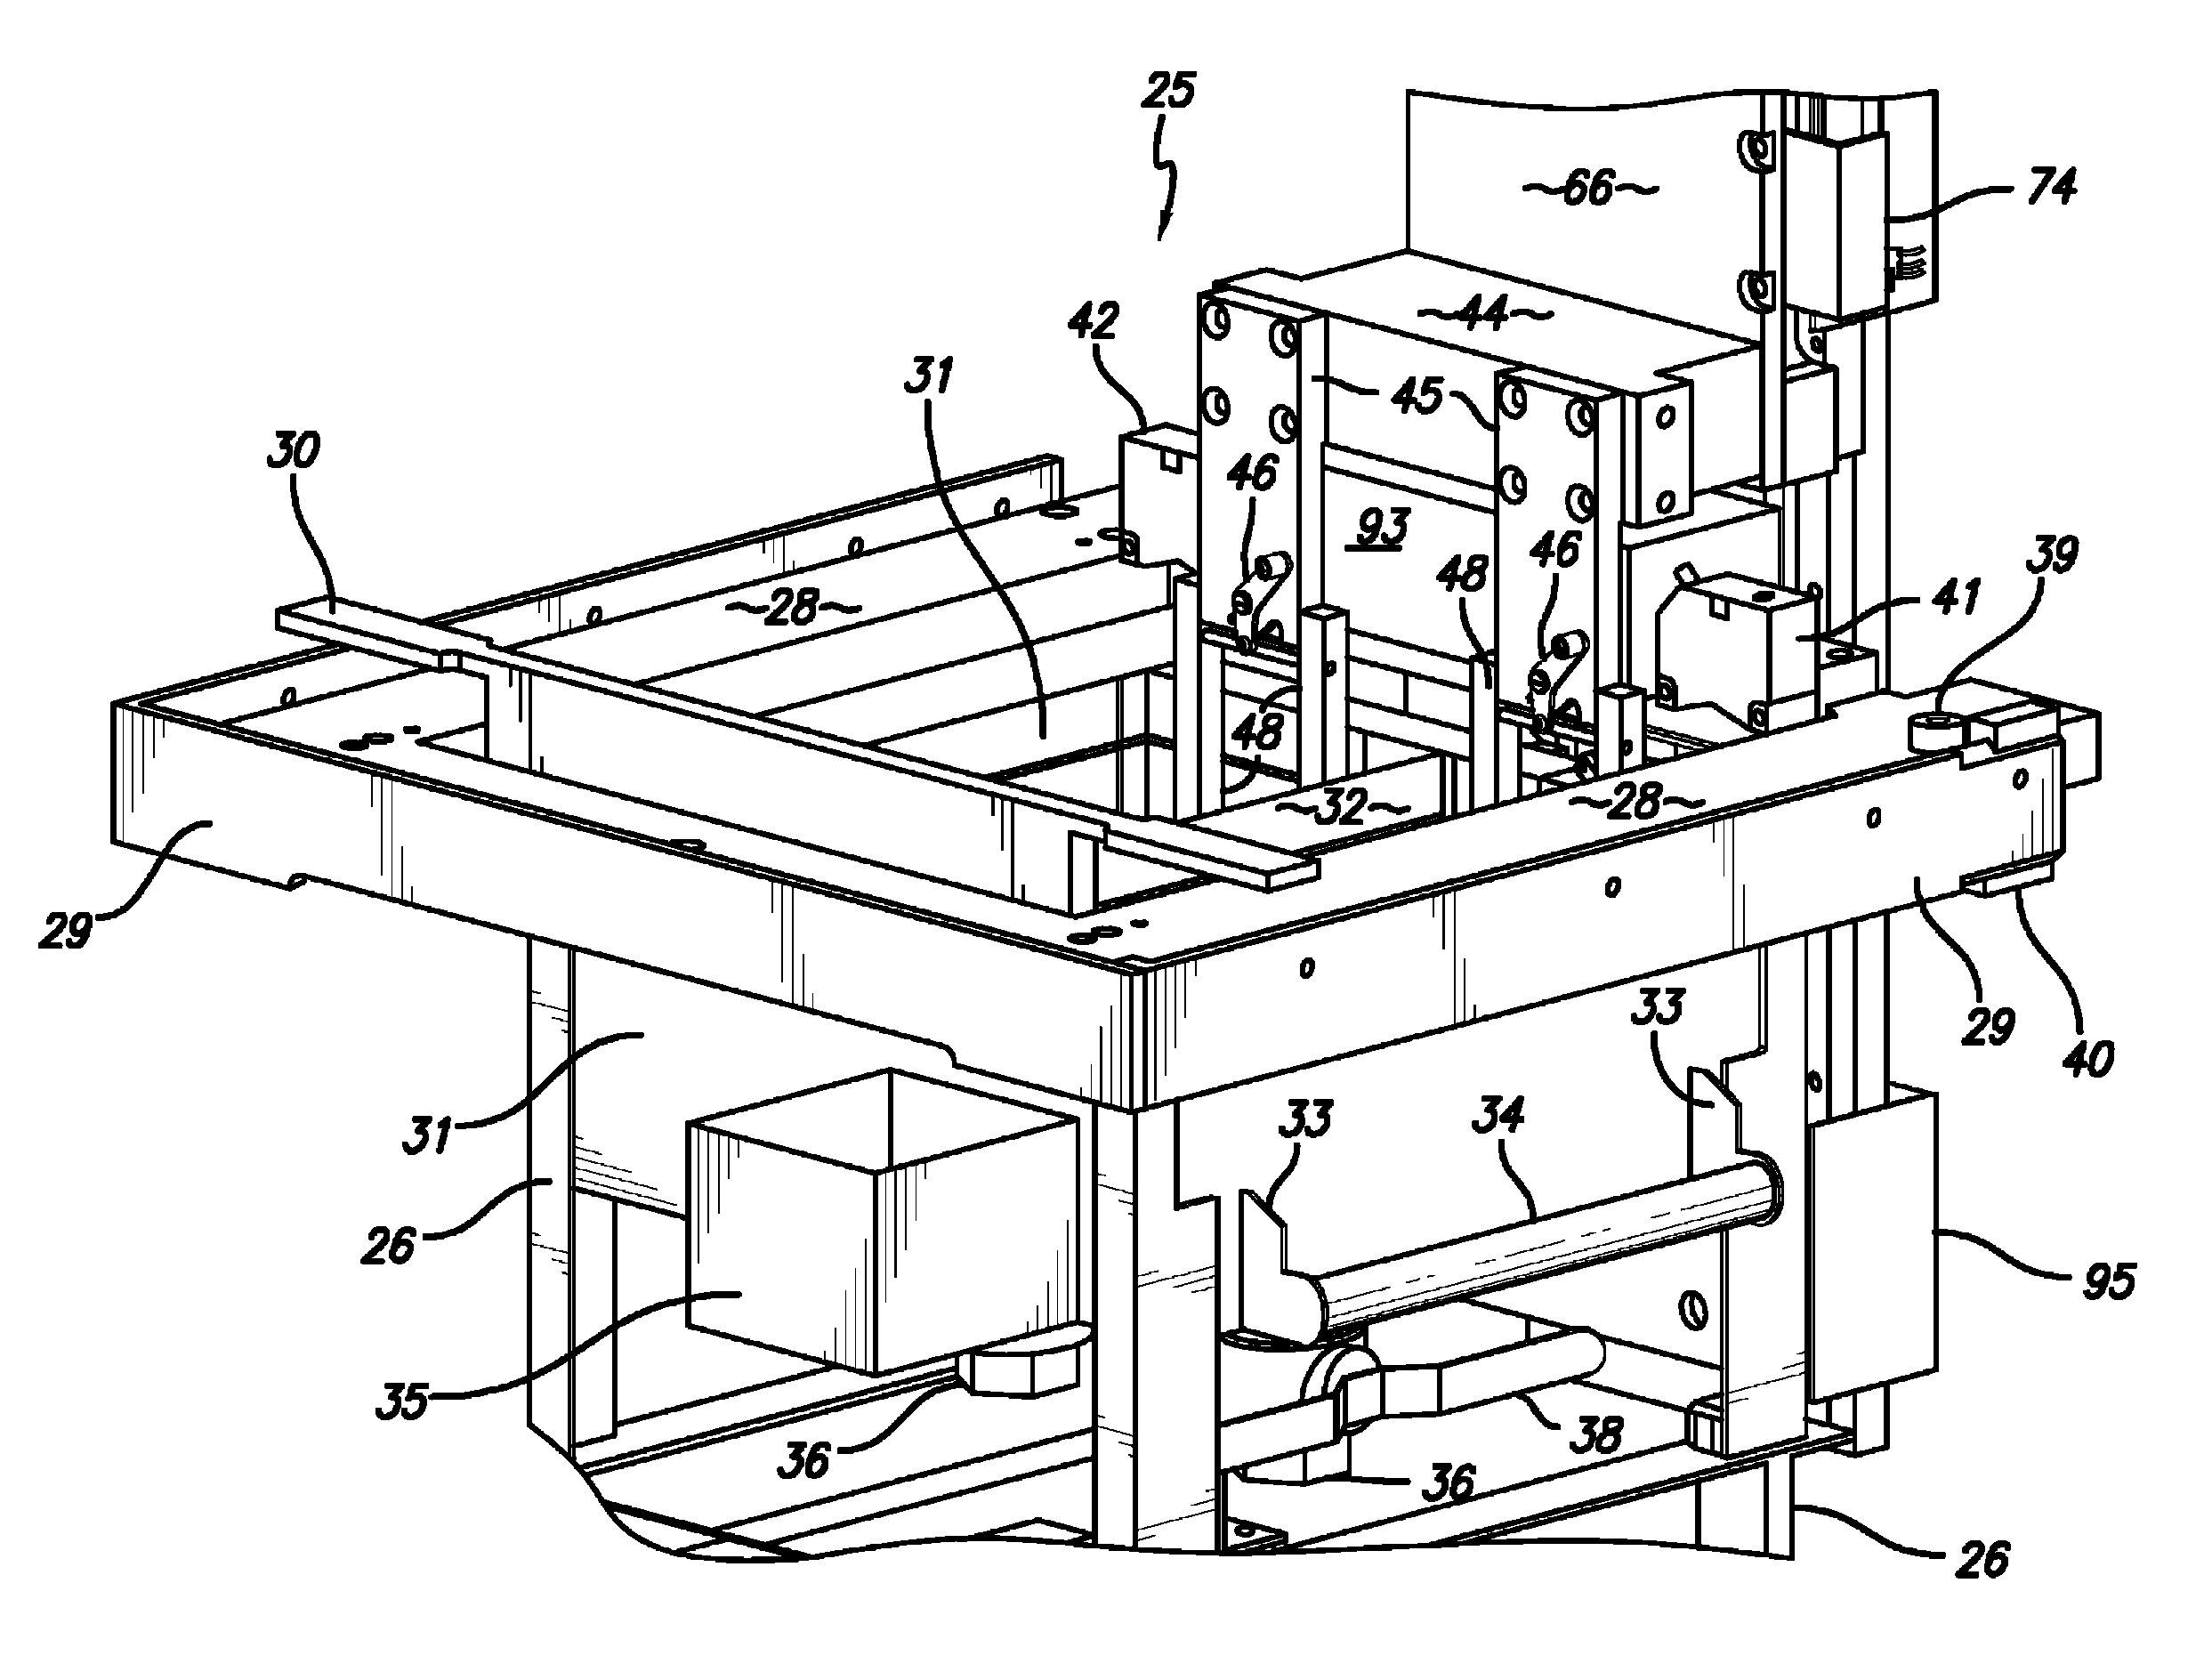 Stereolithographic apparatus